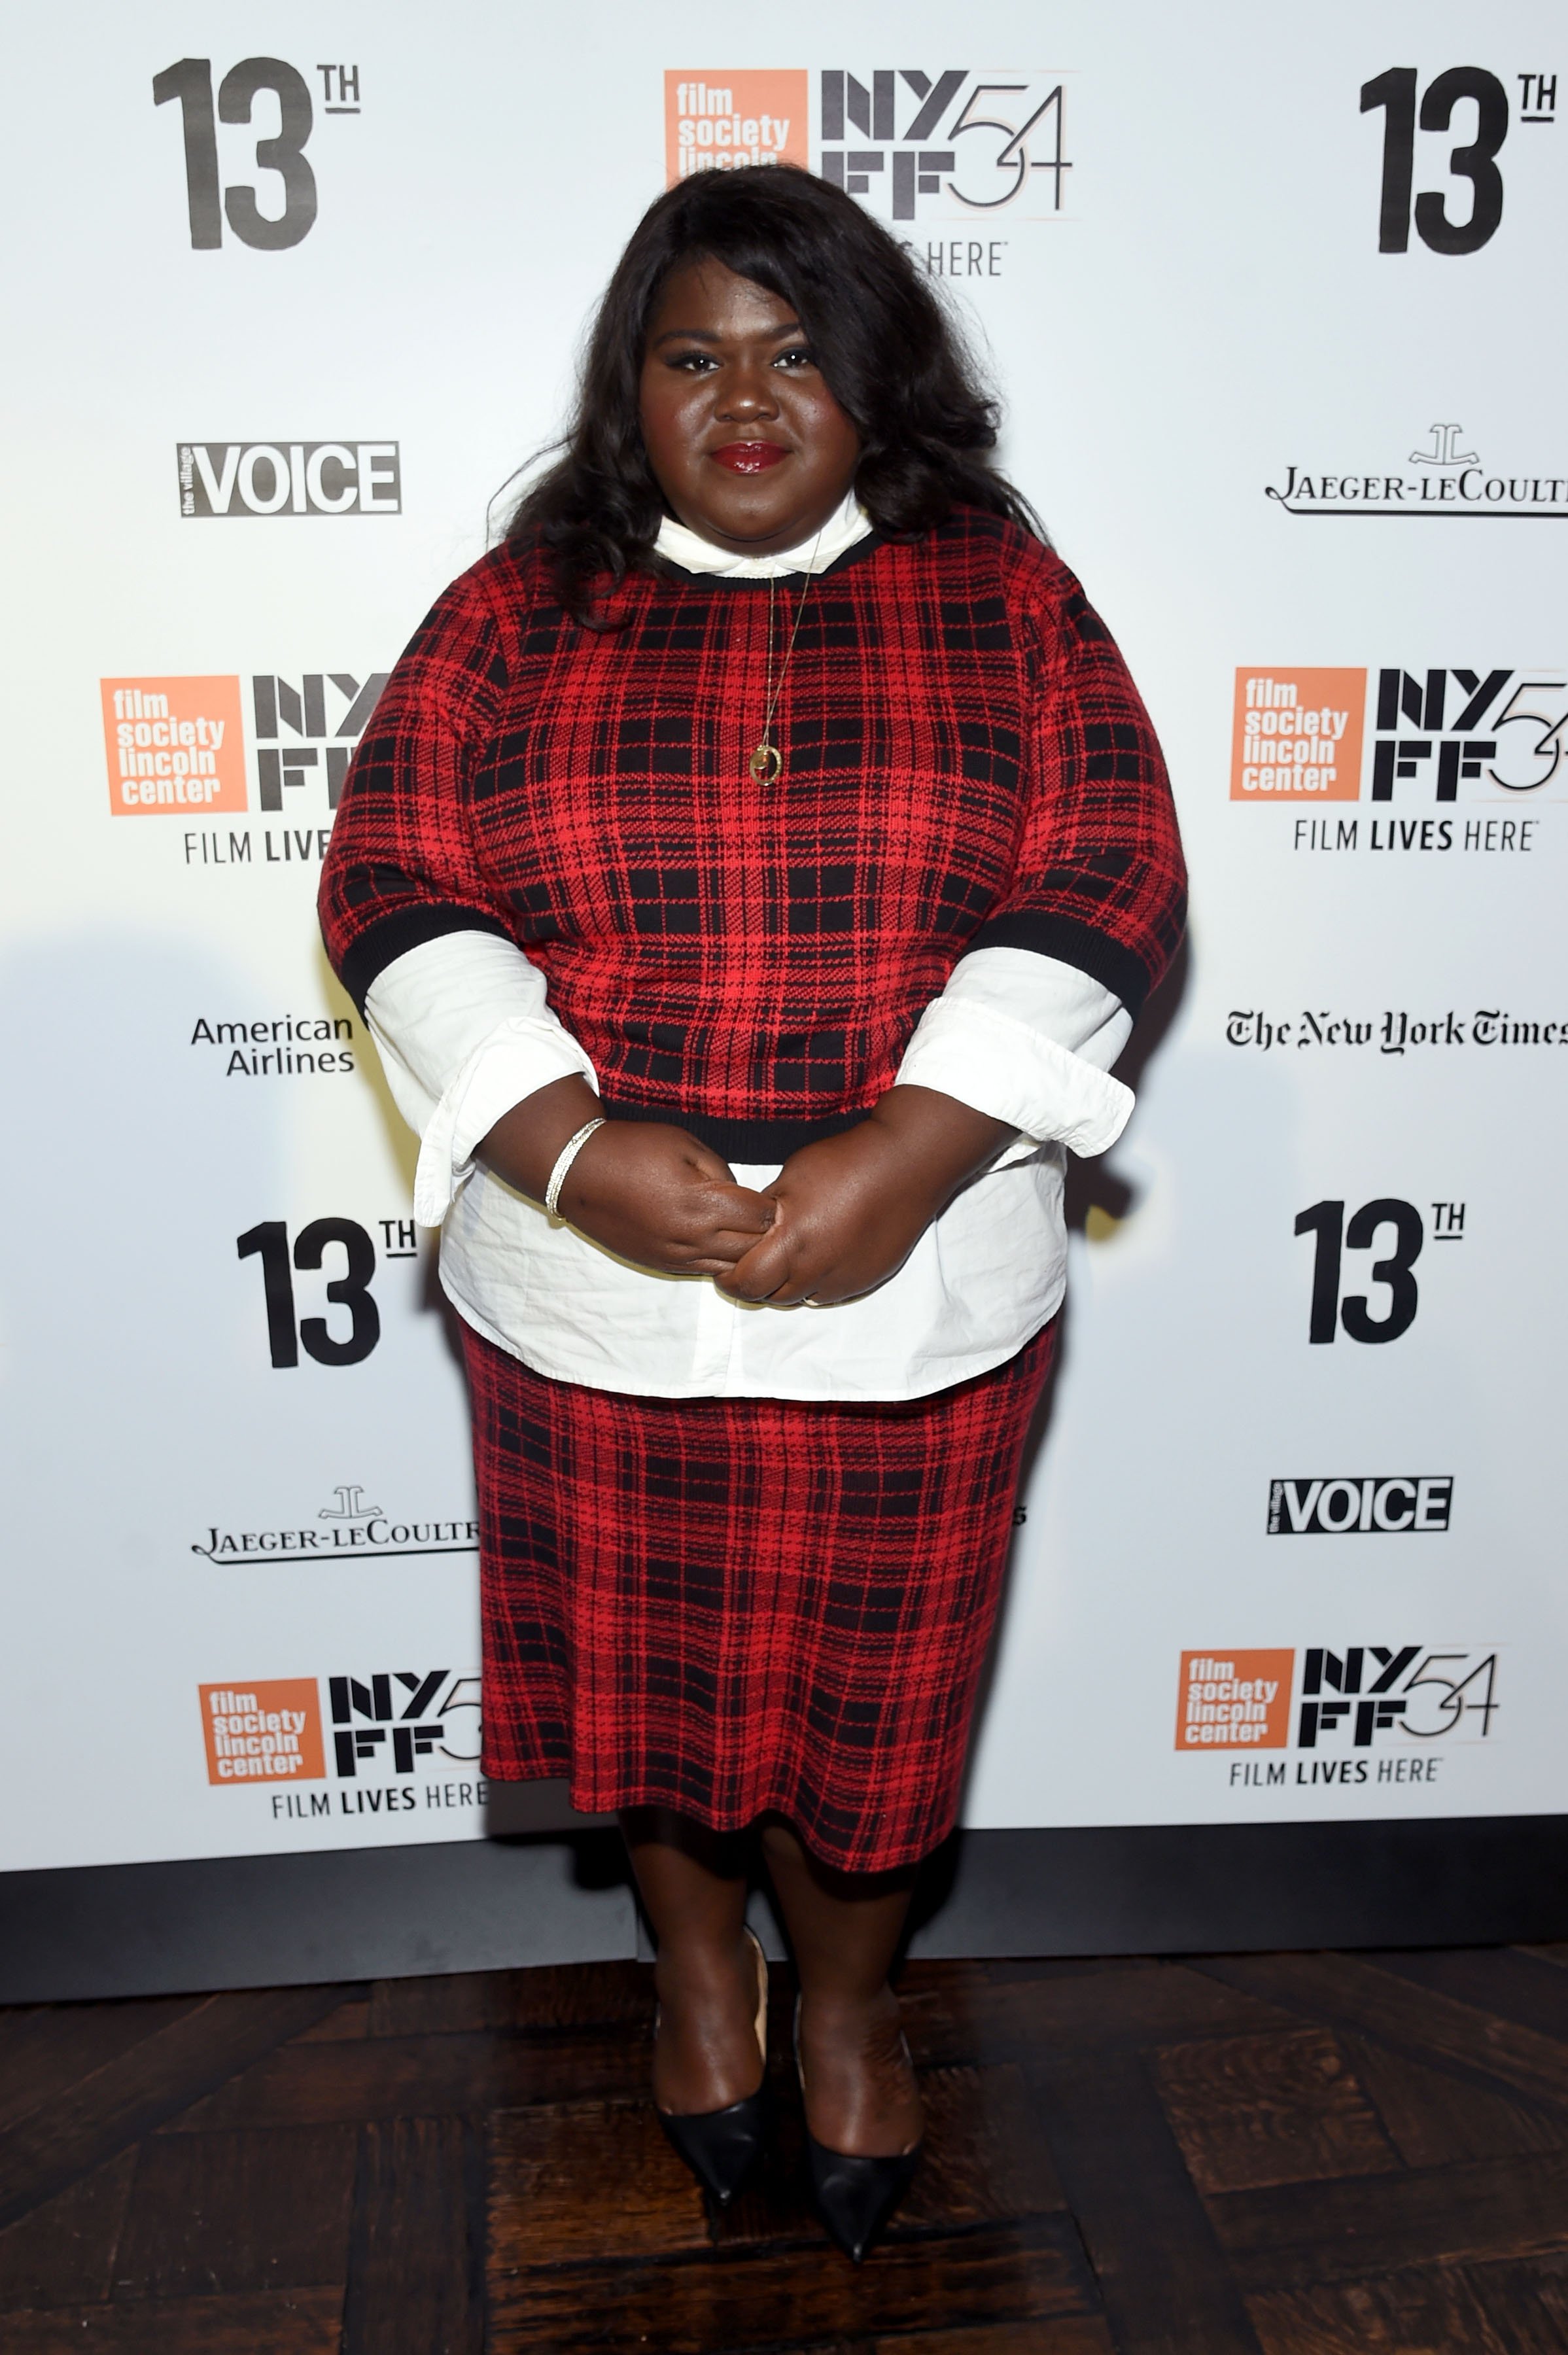 Gabourey Sidibe at the New York Film Festival Opening Night Party on Sept. 30, 2016 in New York City | Photo: Getty Images